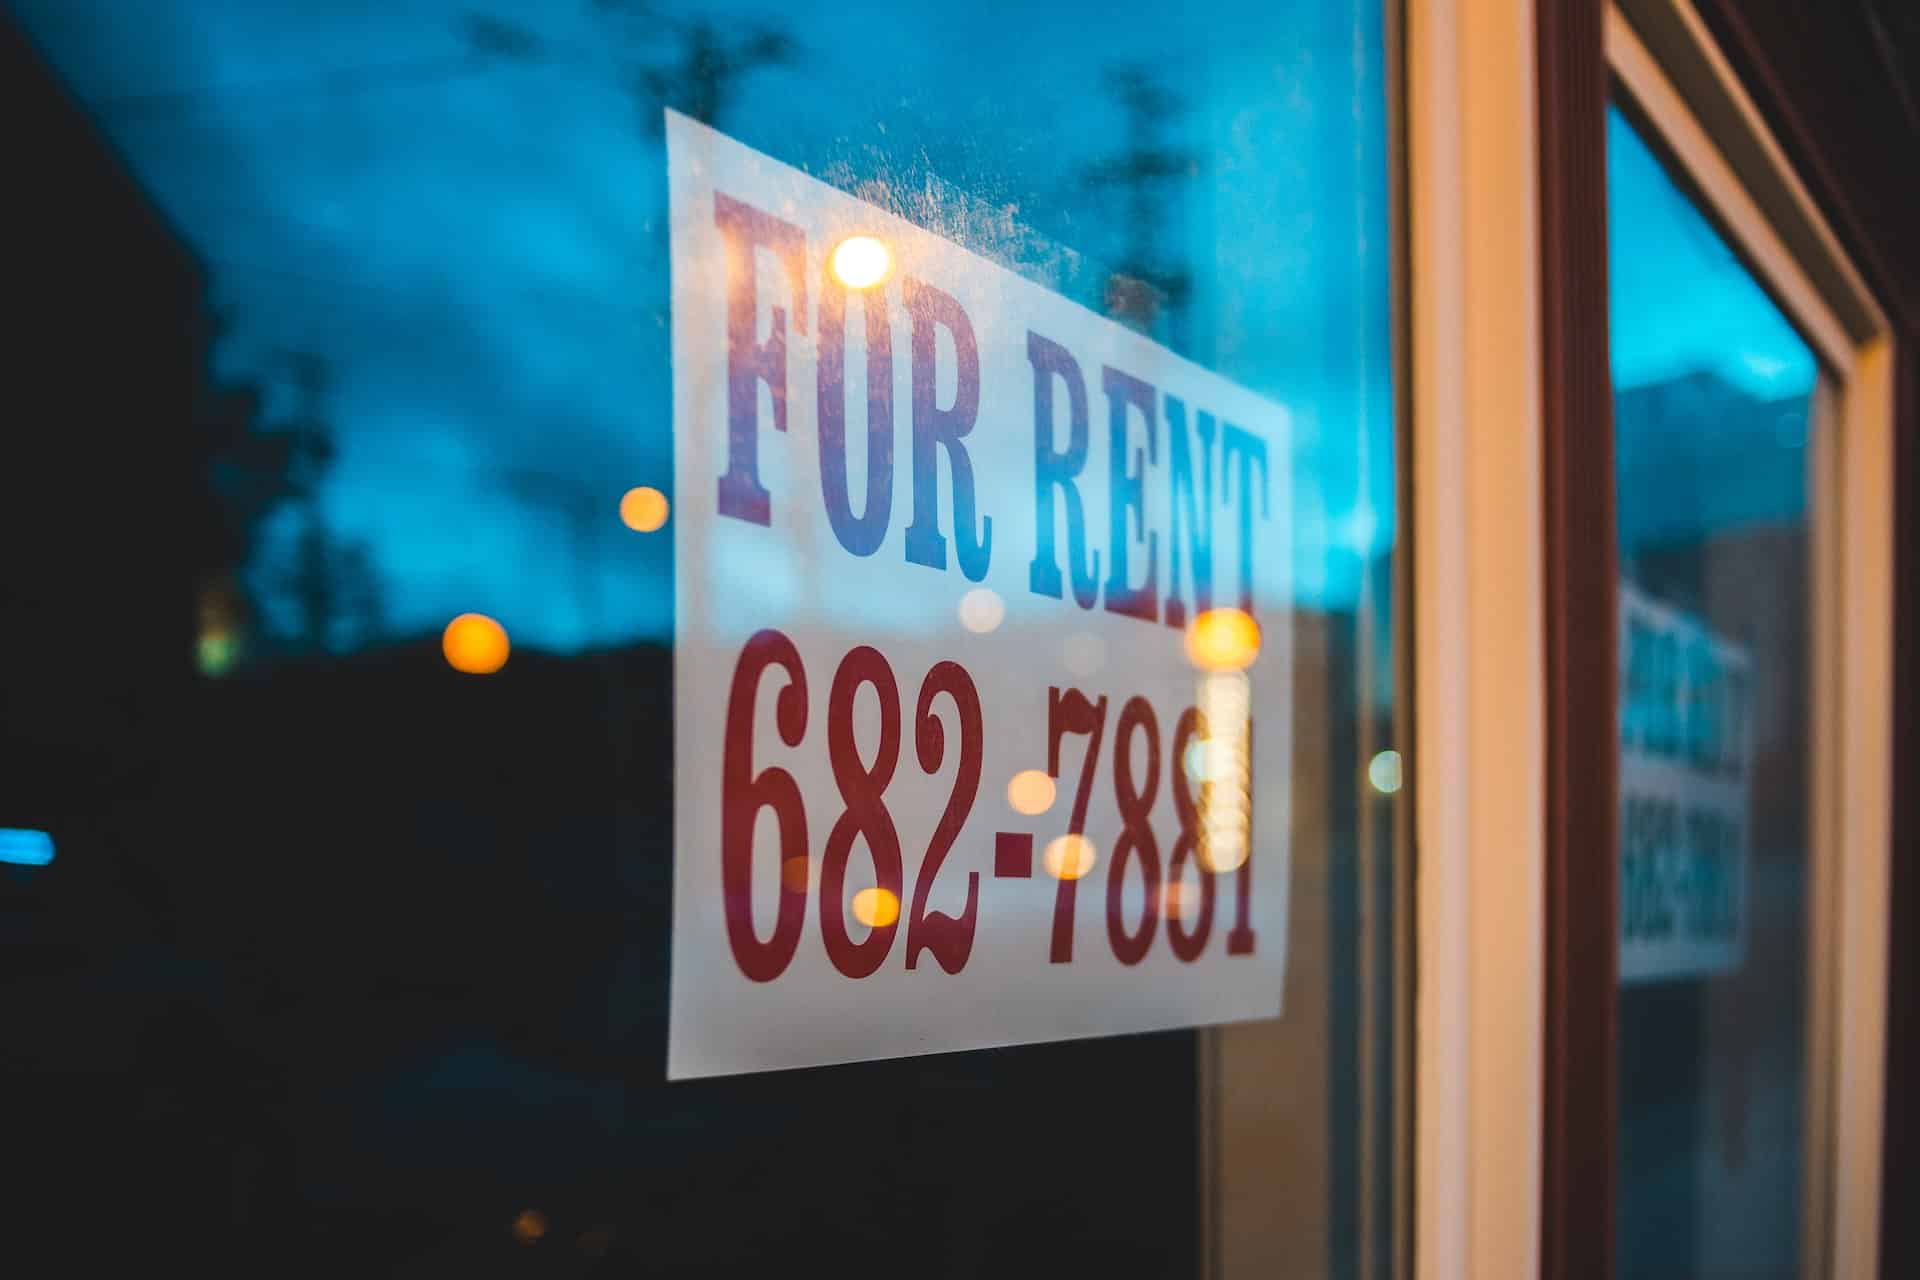 "For rent" sign on a window.